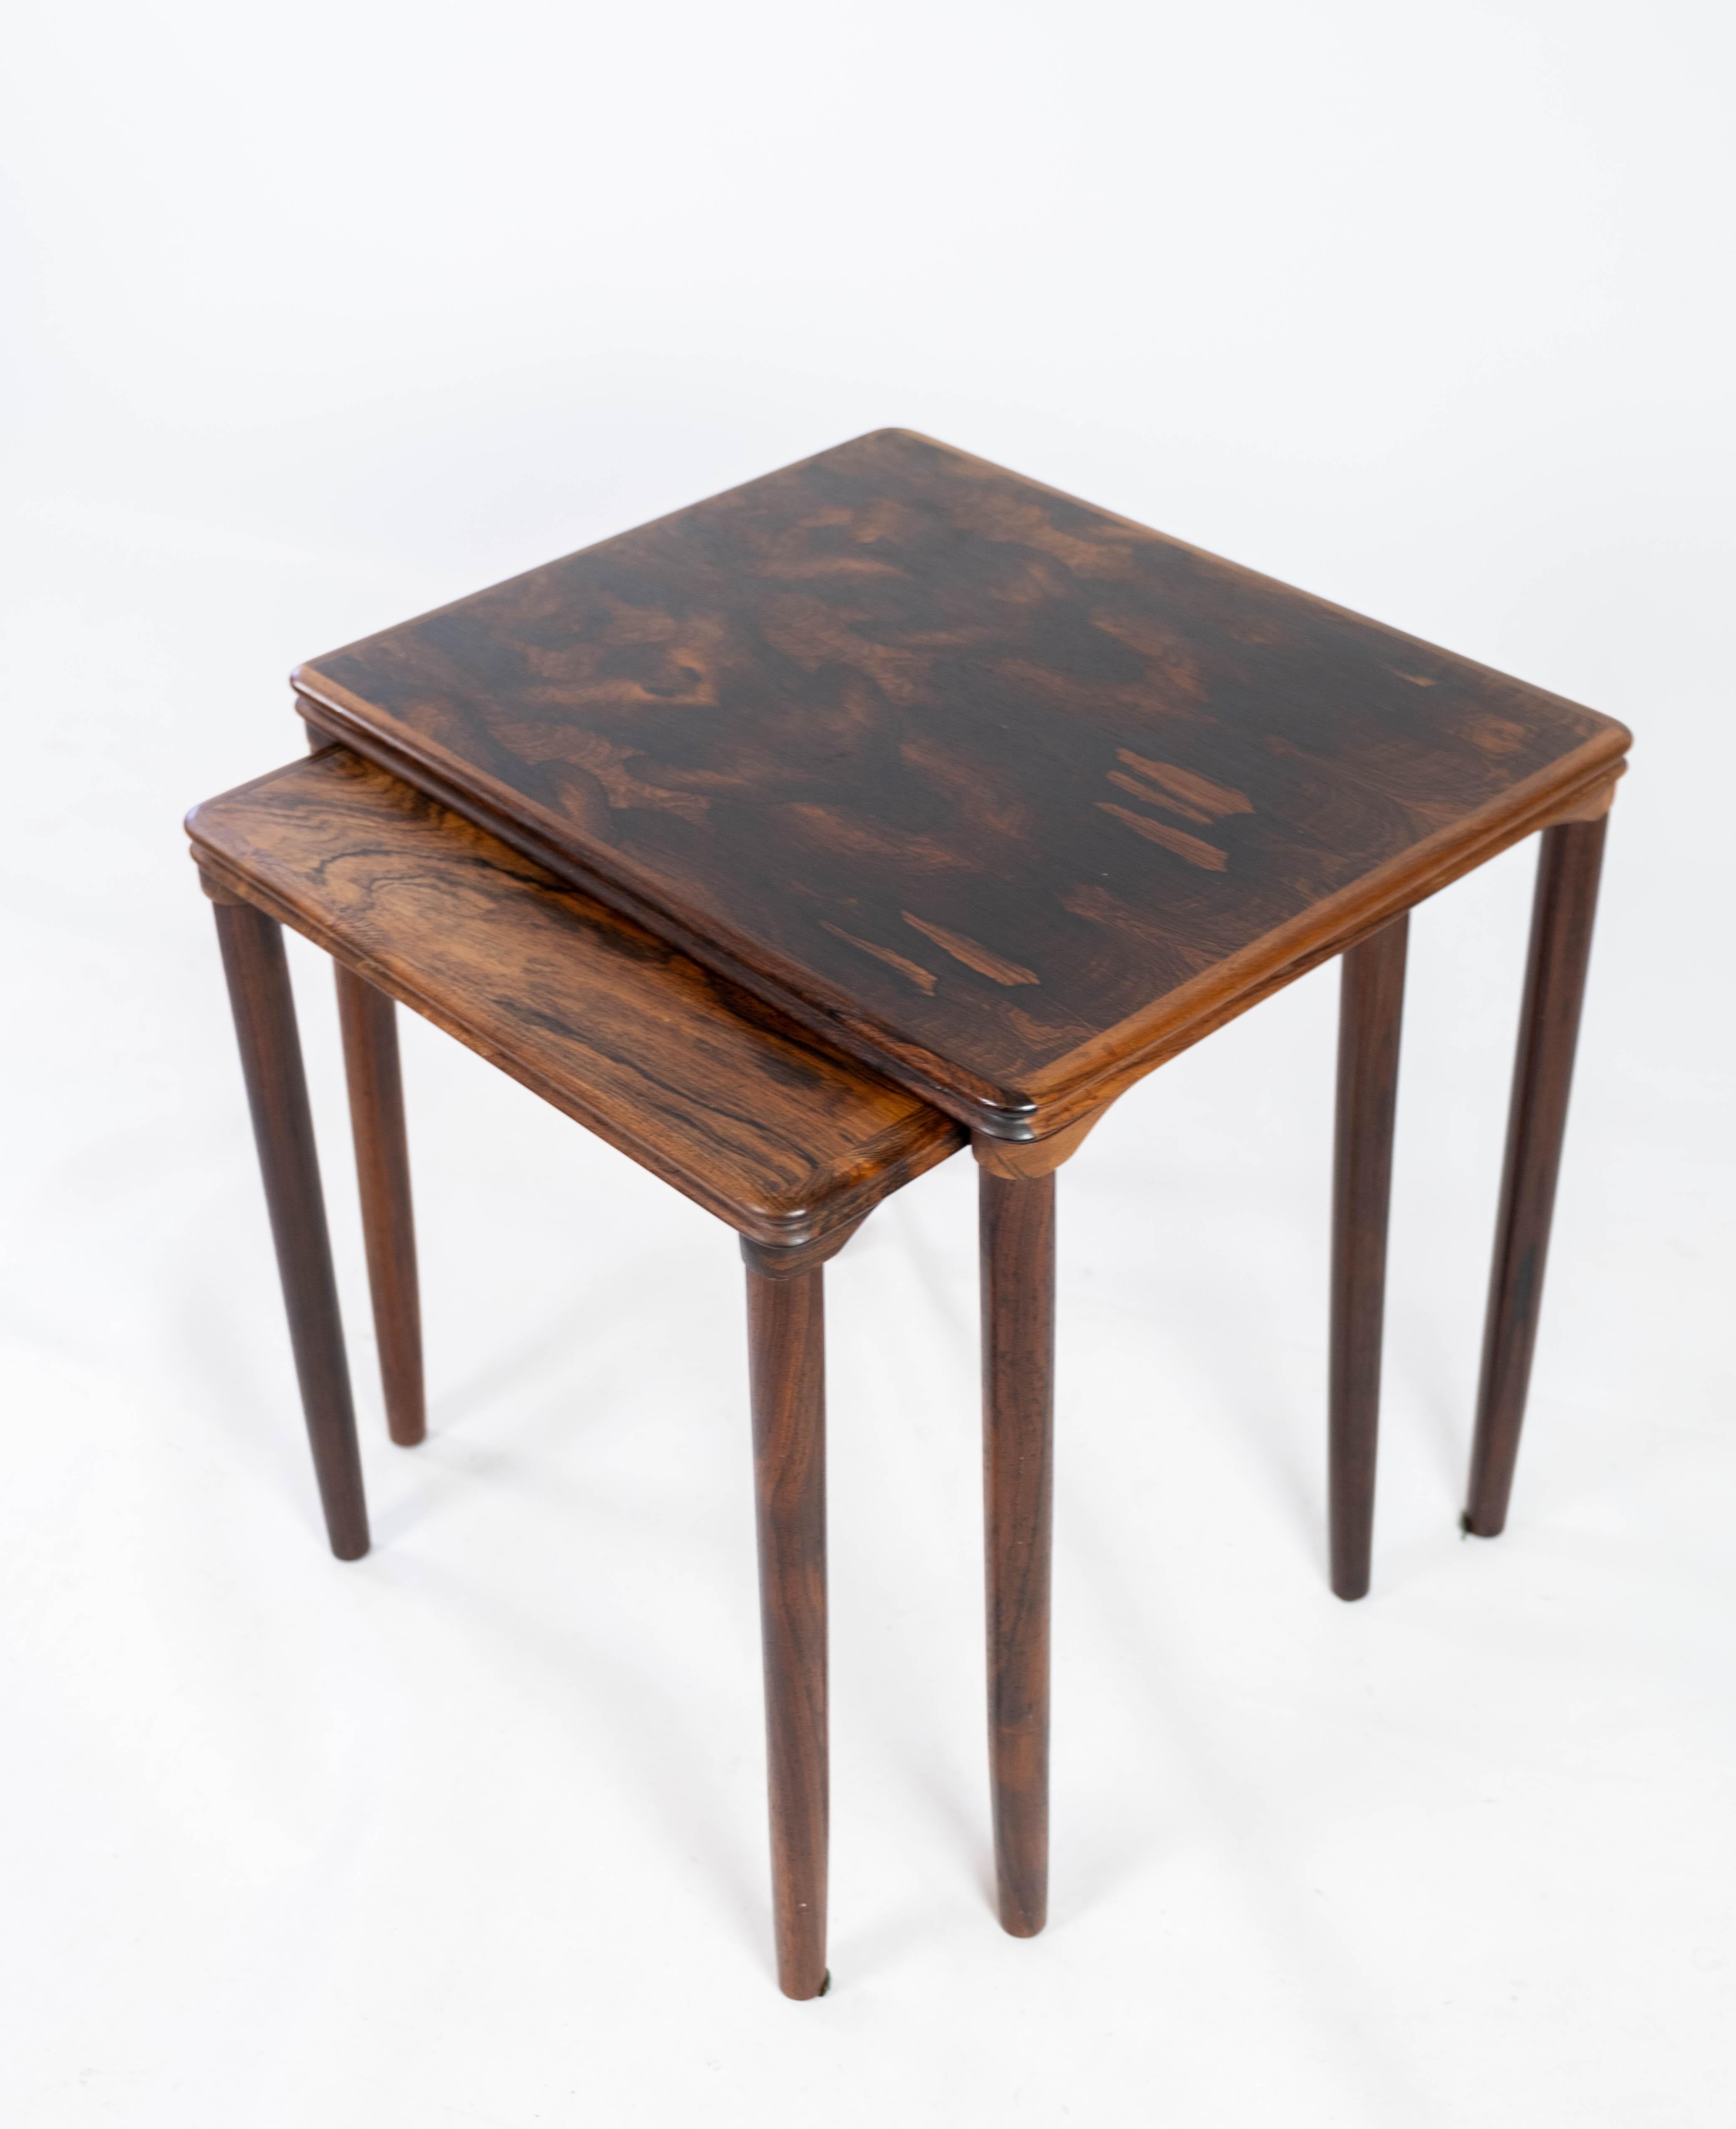 Scandinavian Modern Nesting Tables in Rosewood of Danish Design from the 1960s For Sale